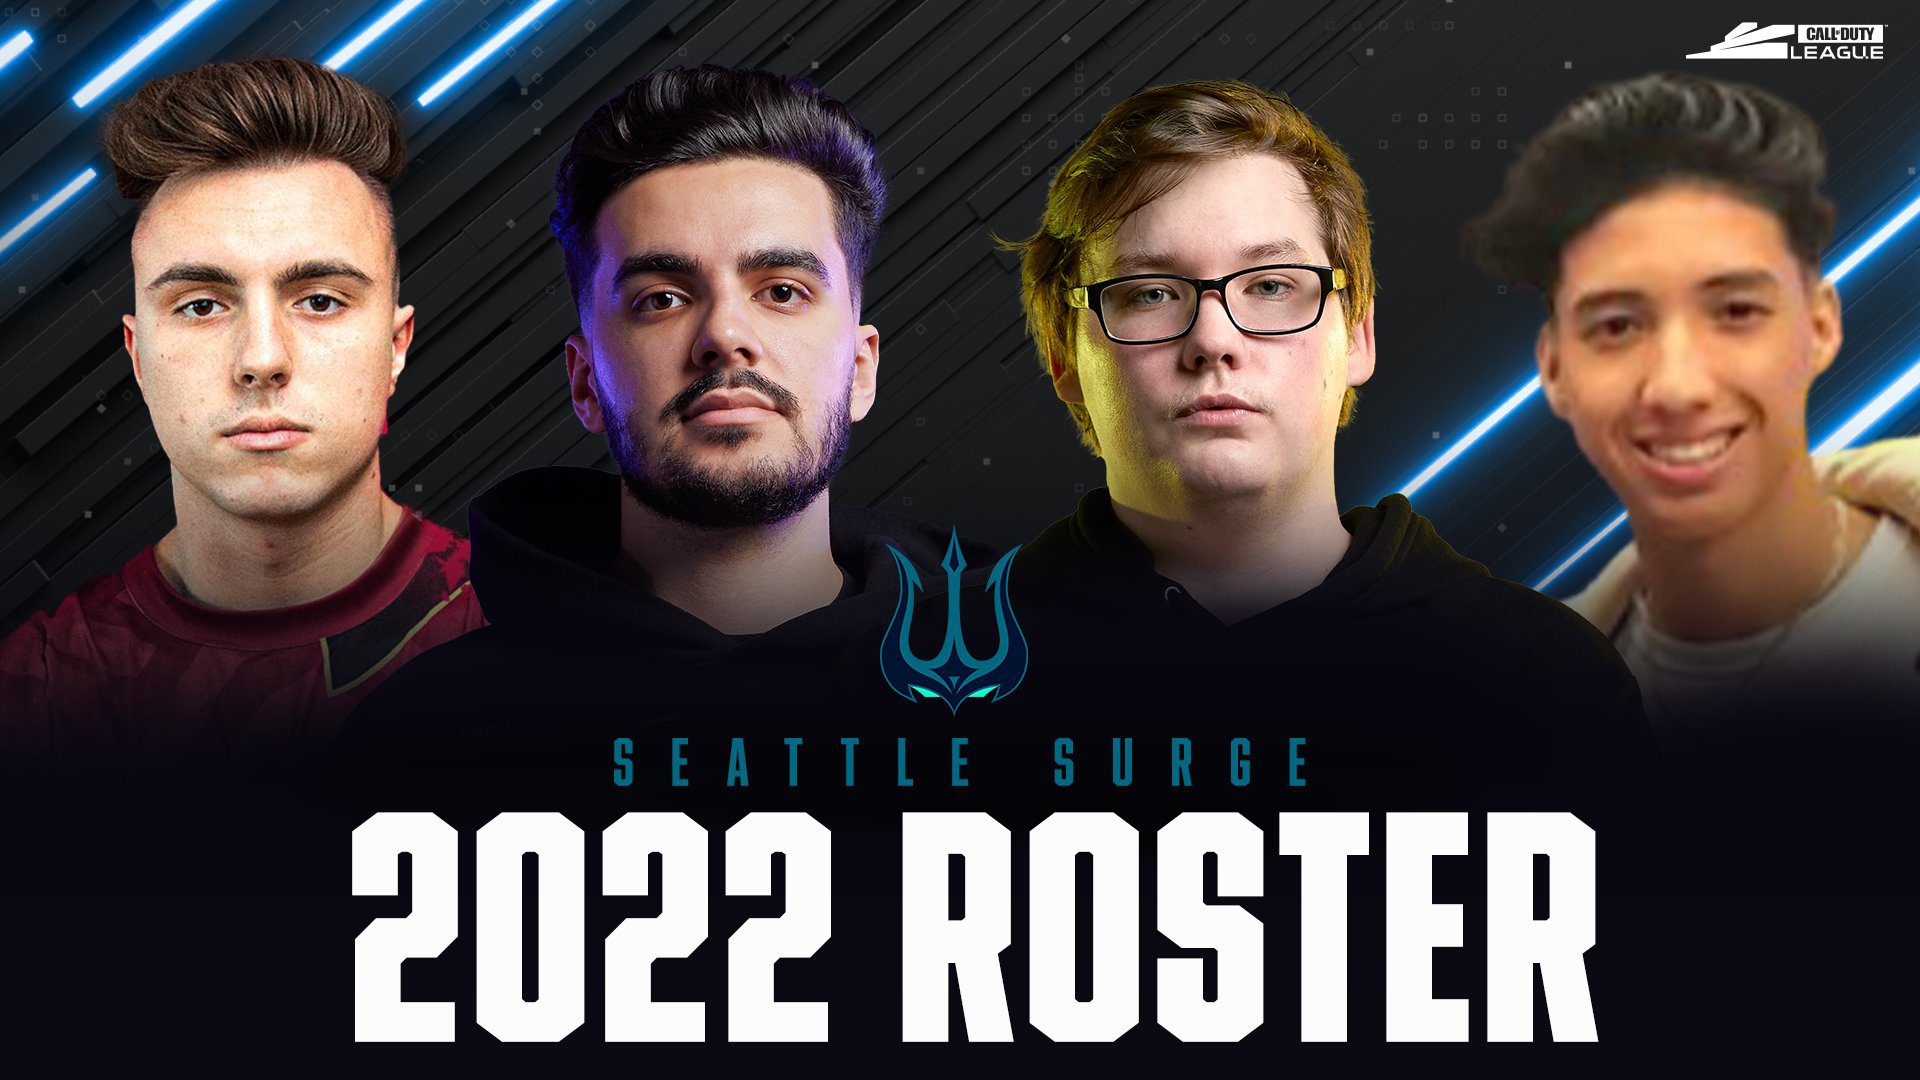 Seattle Surge roster in 2021 for Call of Duty league 2022 preseason power rankings